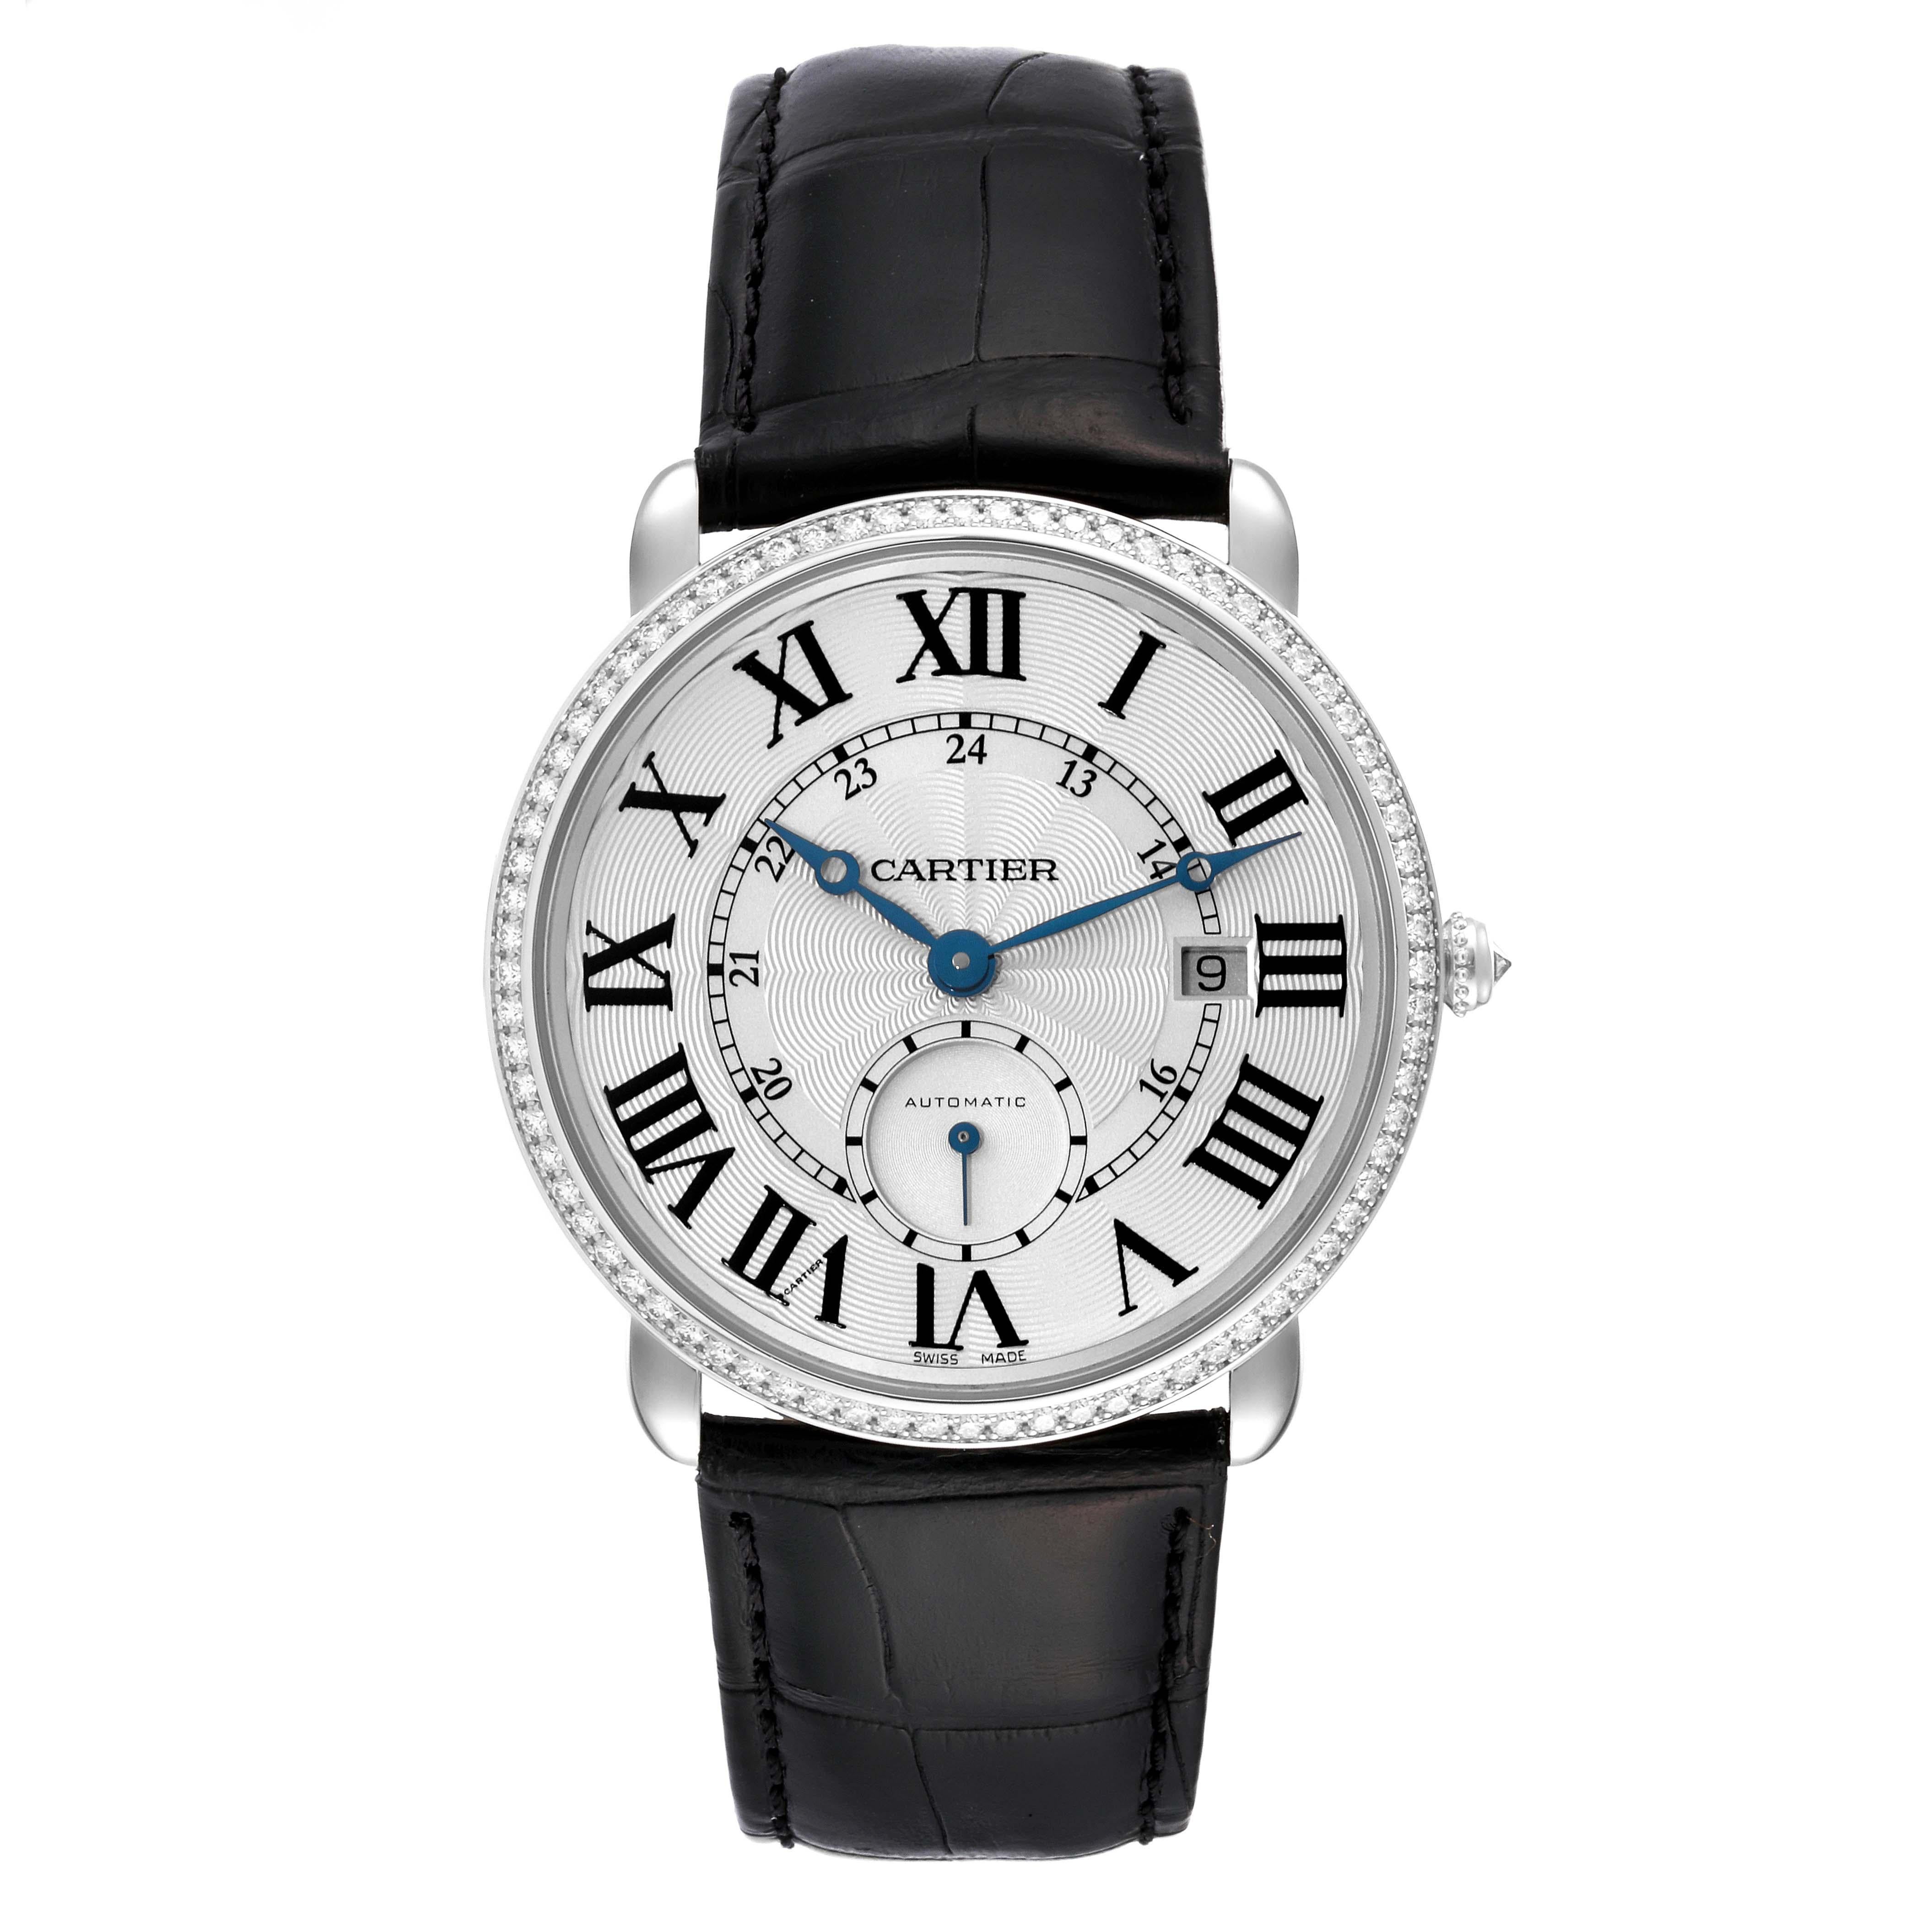 Cartier Ronde Louis White Gold Diamond Bezel Silver Dial Mens Watch WR007018. Automatic self-winding movement. 18k white gold case 40.0 mm in diameter. Transparent exhibition sapphire crystal caseback. Circular grained crown set with an original